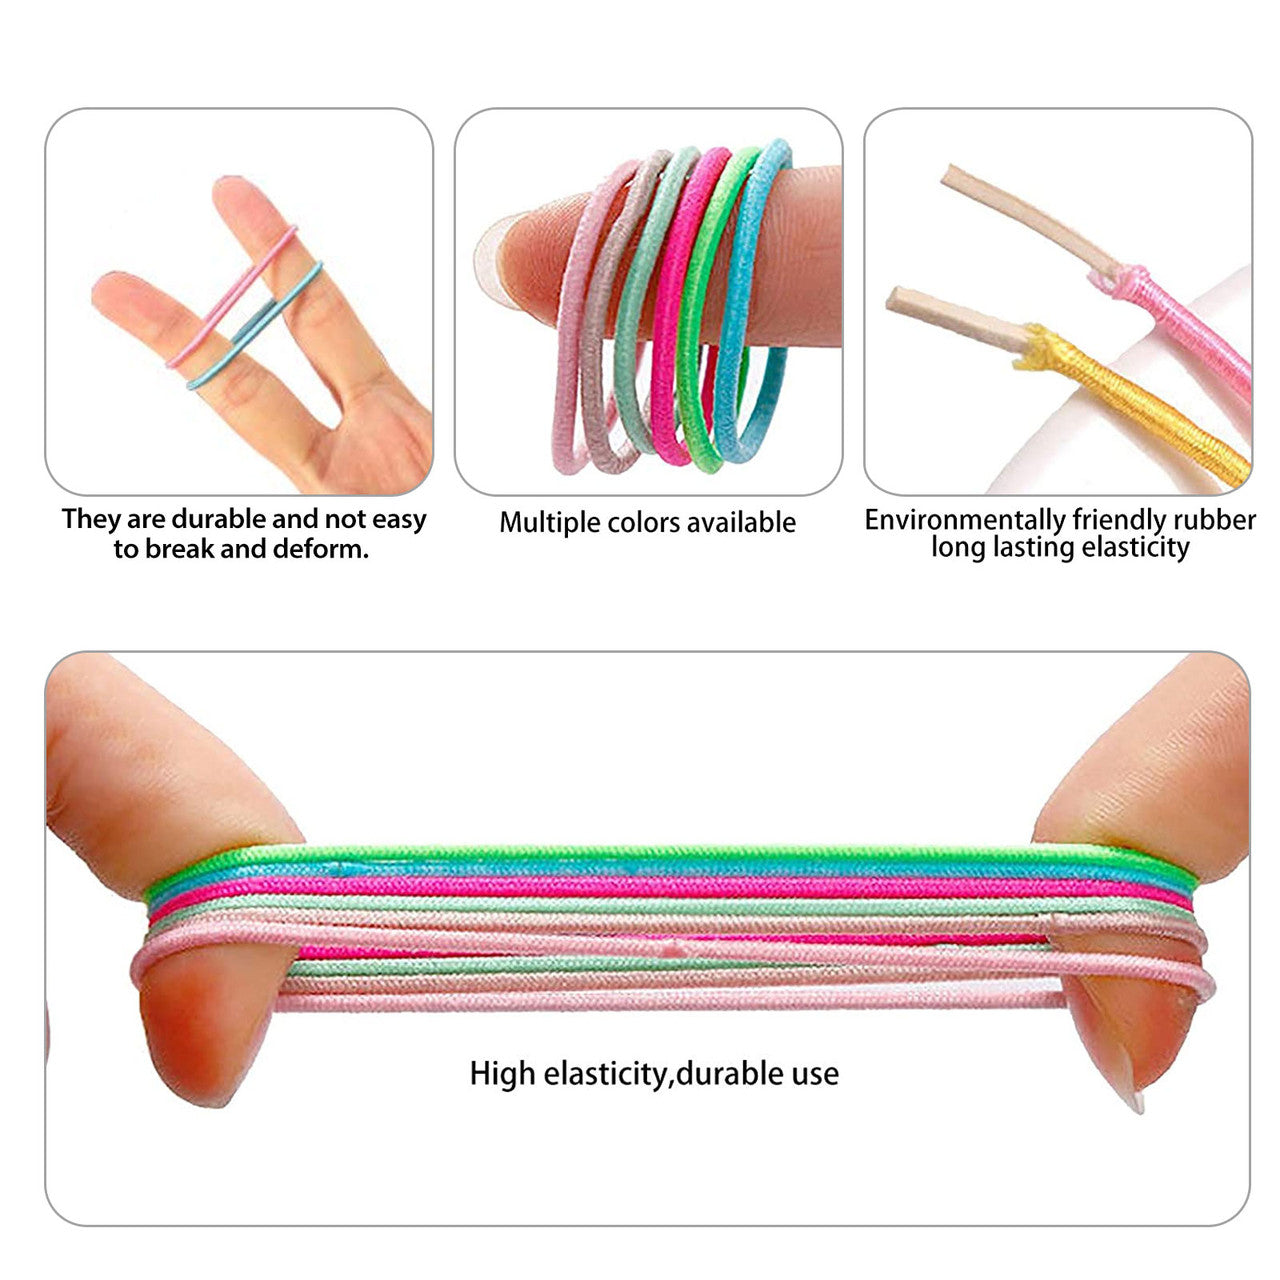 200 Elastic Hair Ties 20 Colors - Ready for All Occassions Girls Teens Adults Women